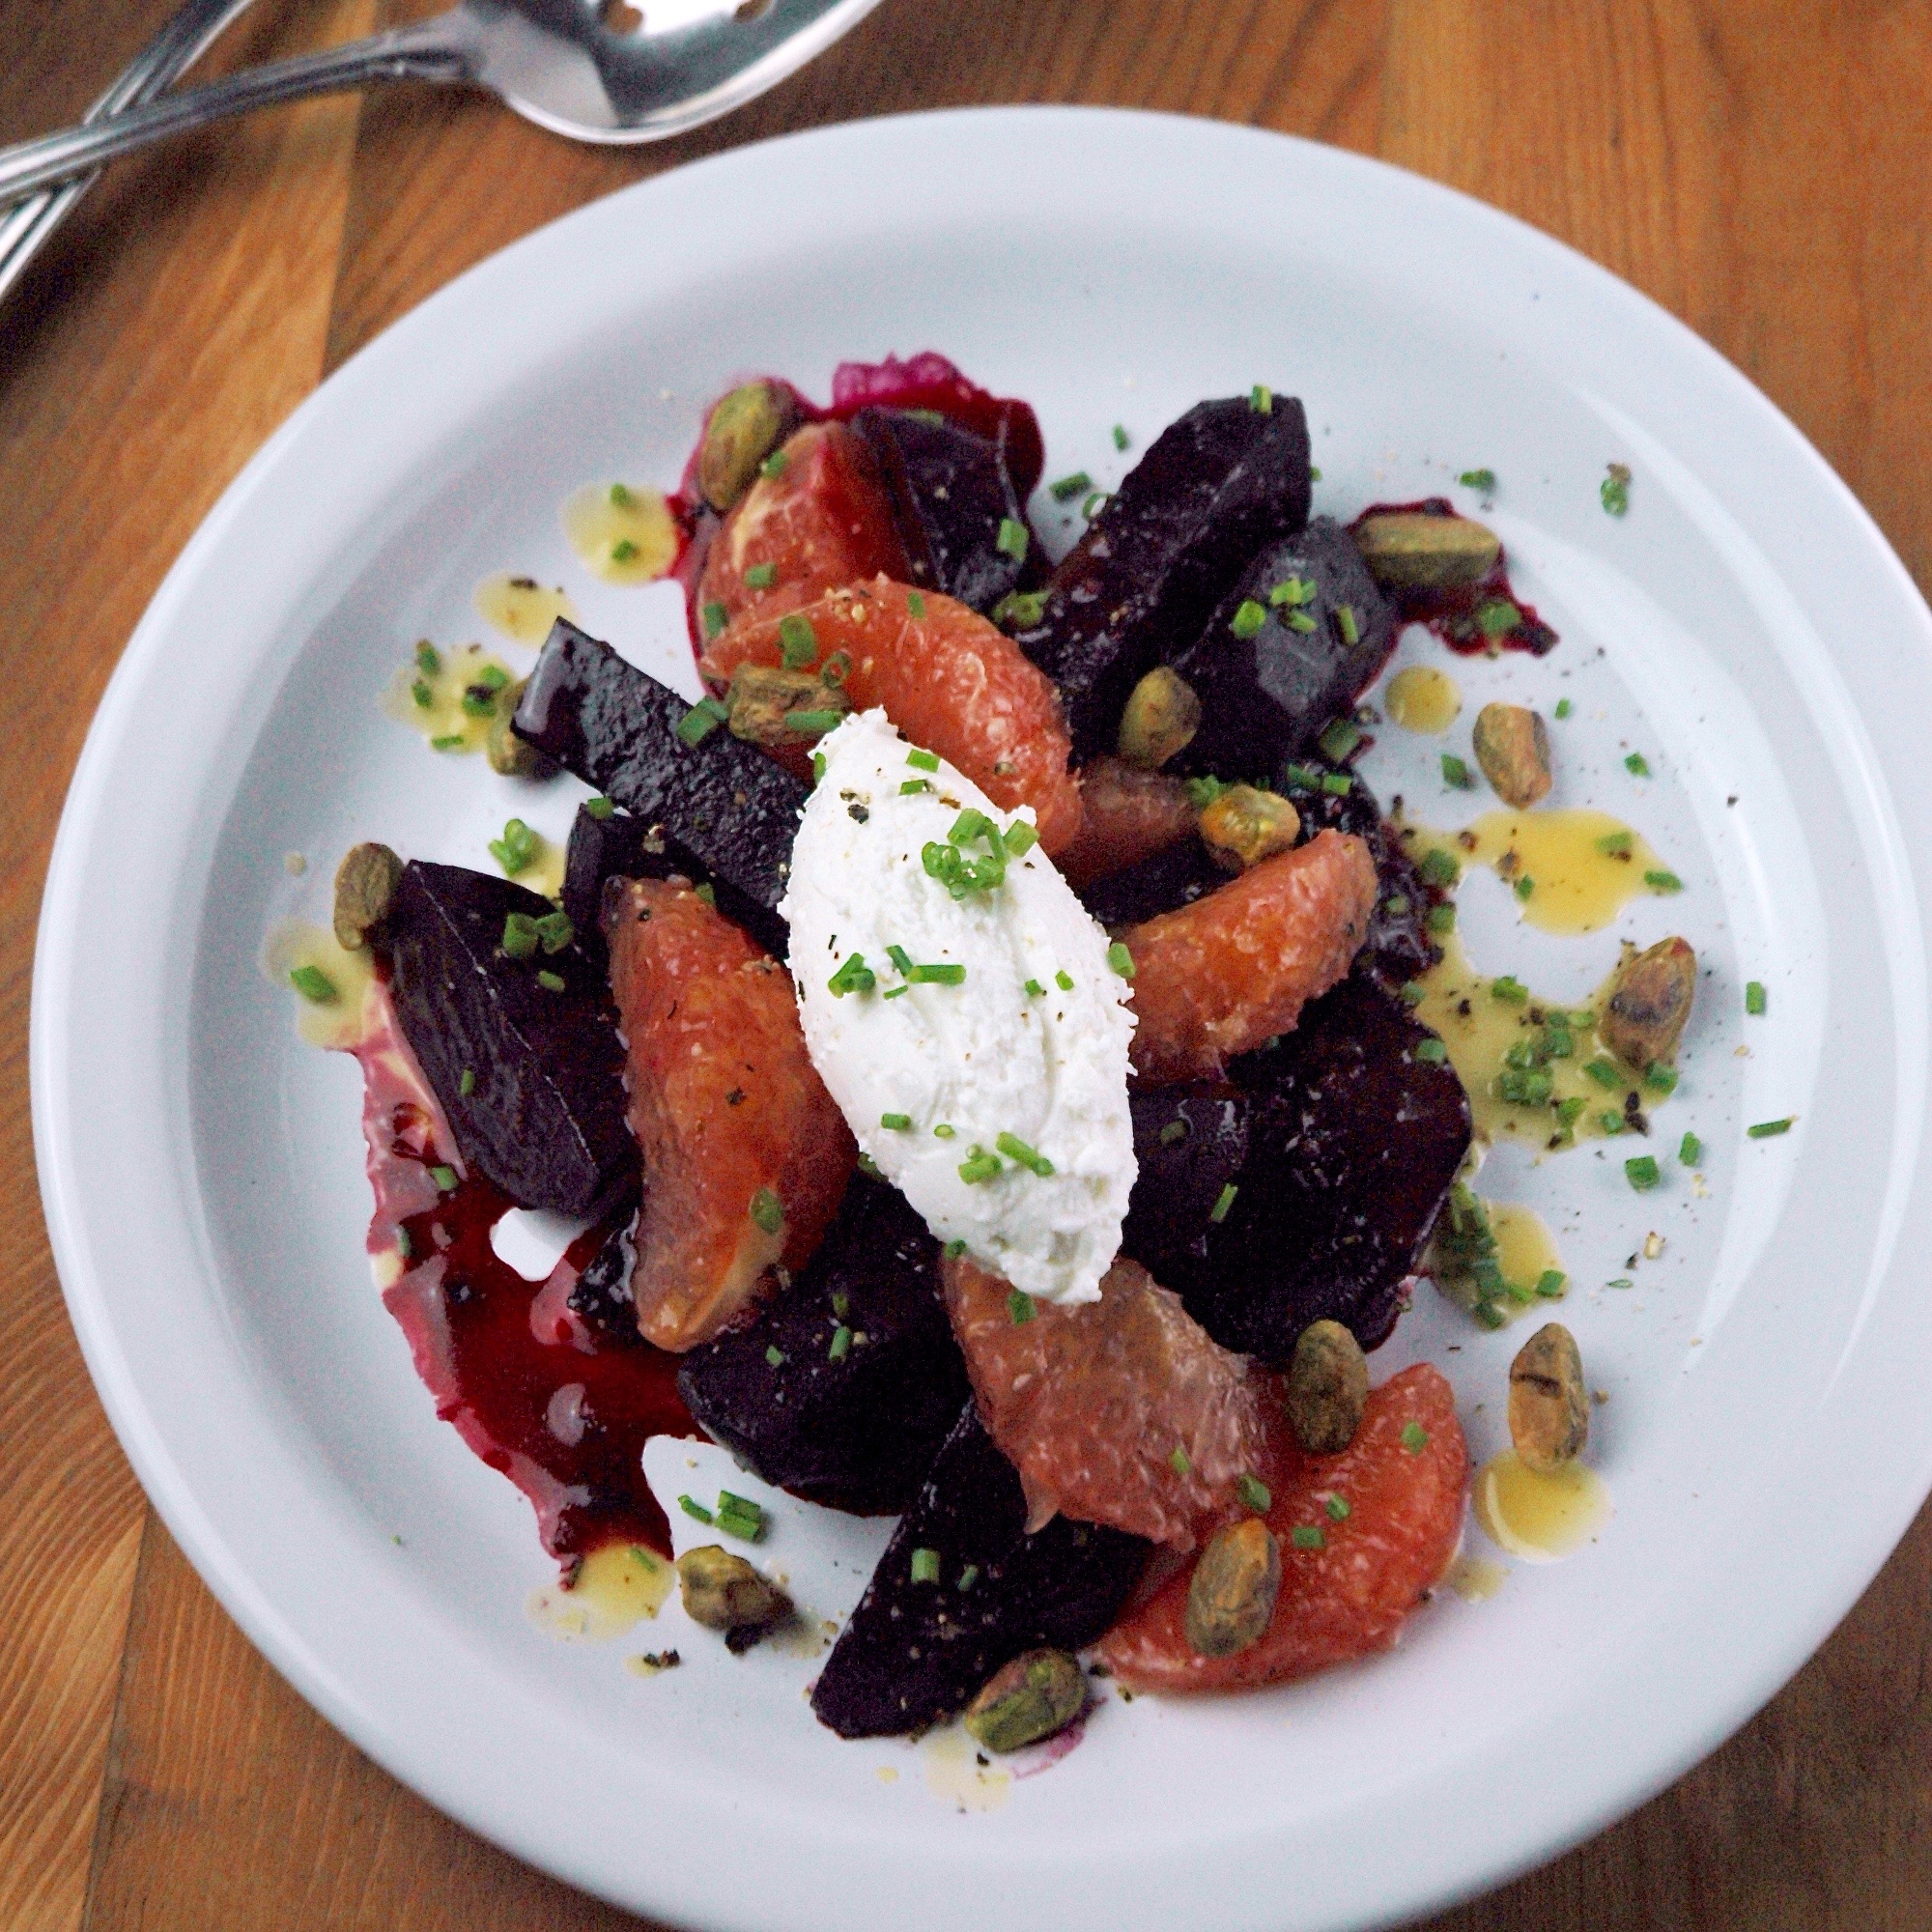 Roasted Beet Salad with Goat Cheese Mousse and Ginger Vinaigrette